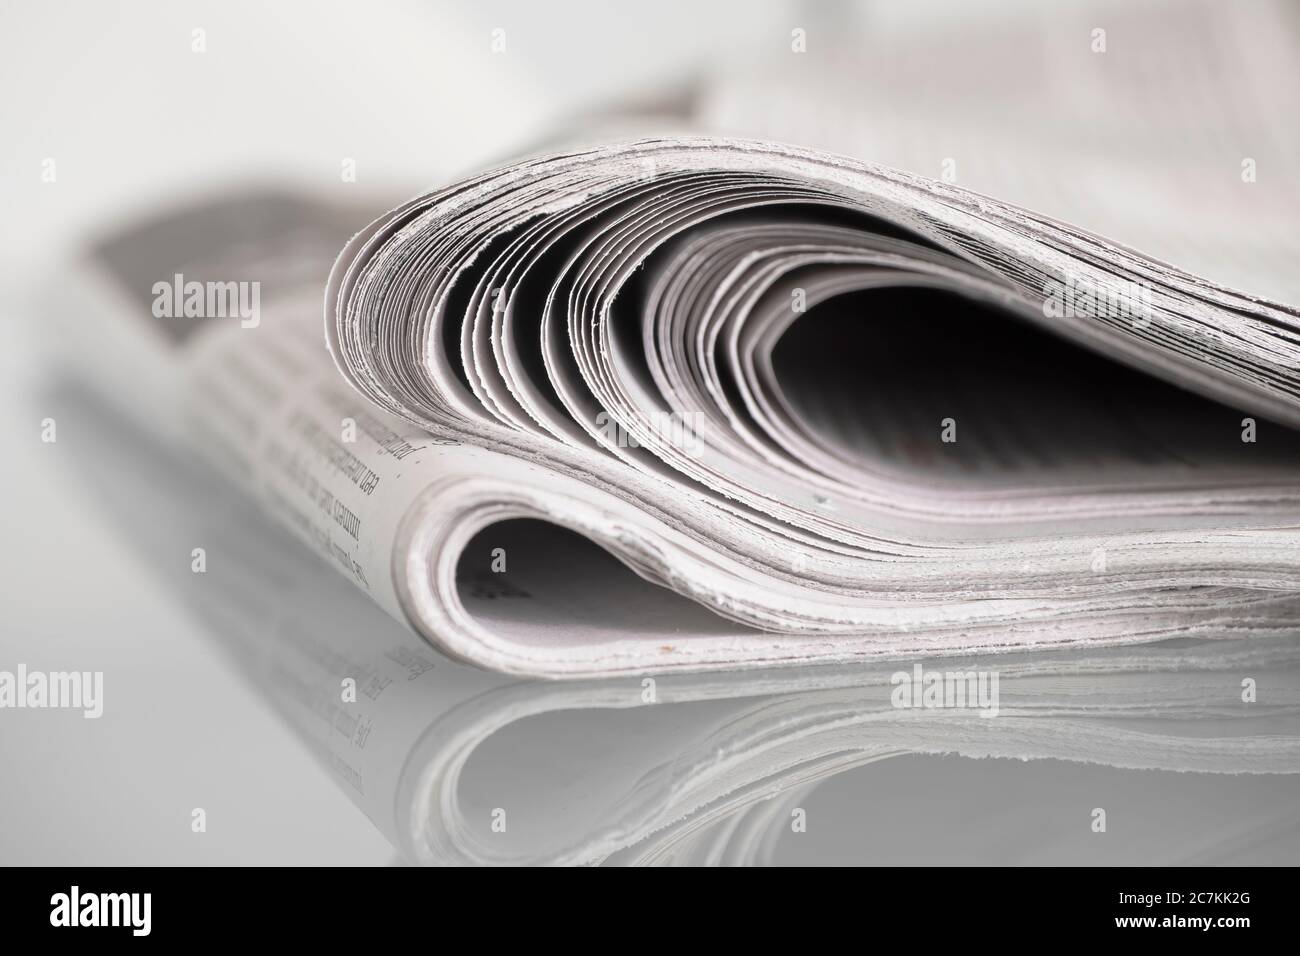 Folded newspaper mirrored on glass table against plain background with narrow depth of field Stock Photo